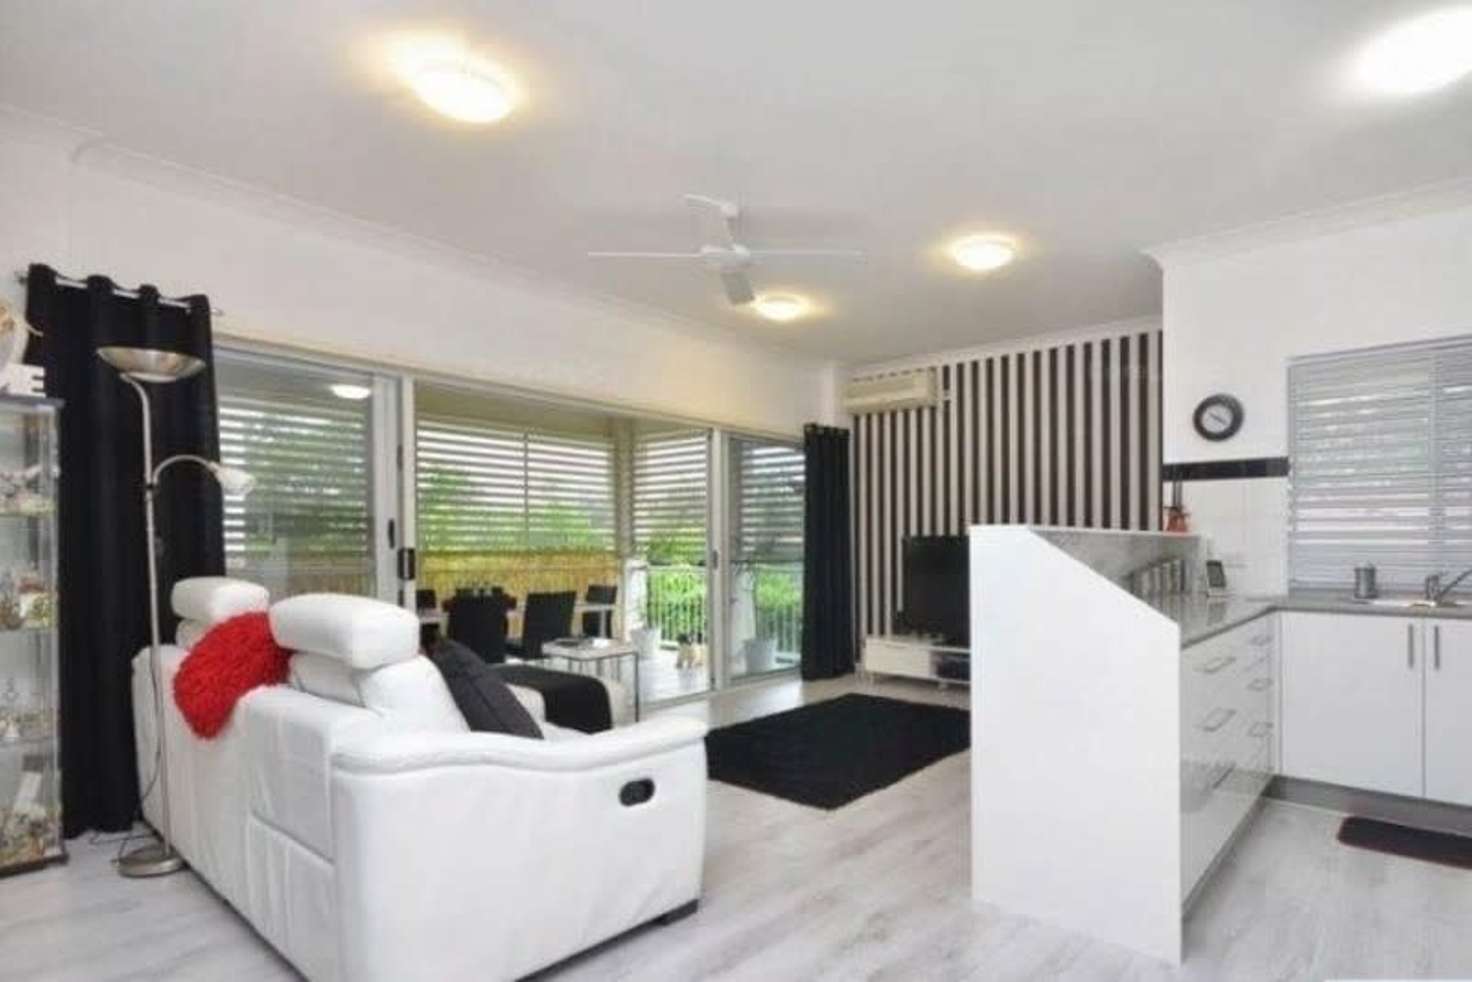 Main view of Homely apartment listing, 10/41 Racecourse Road, Hamilton QLD 4007